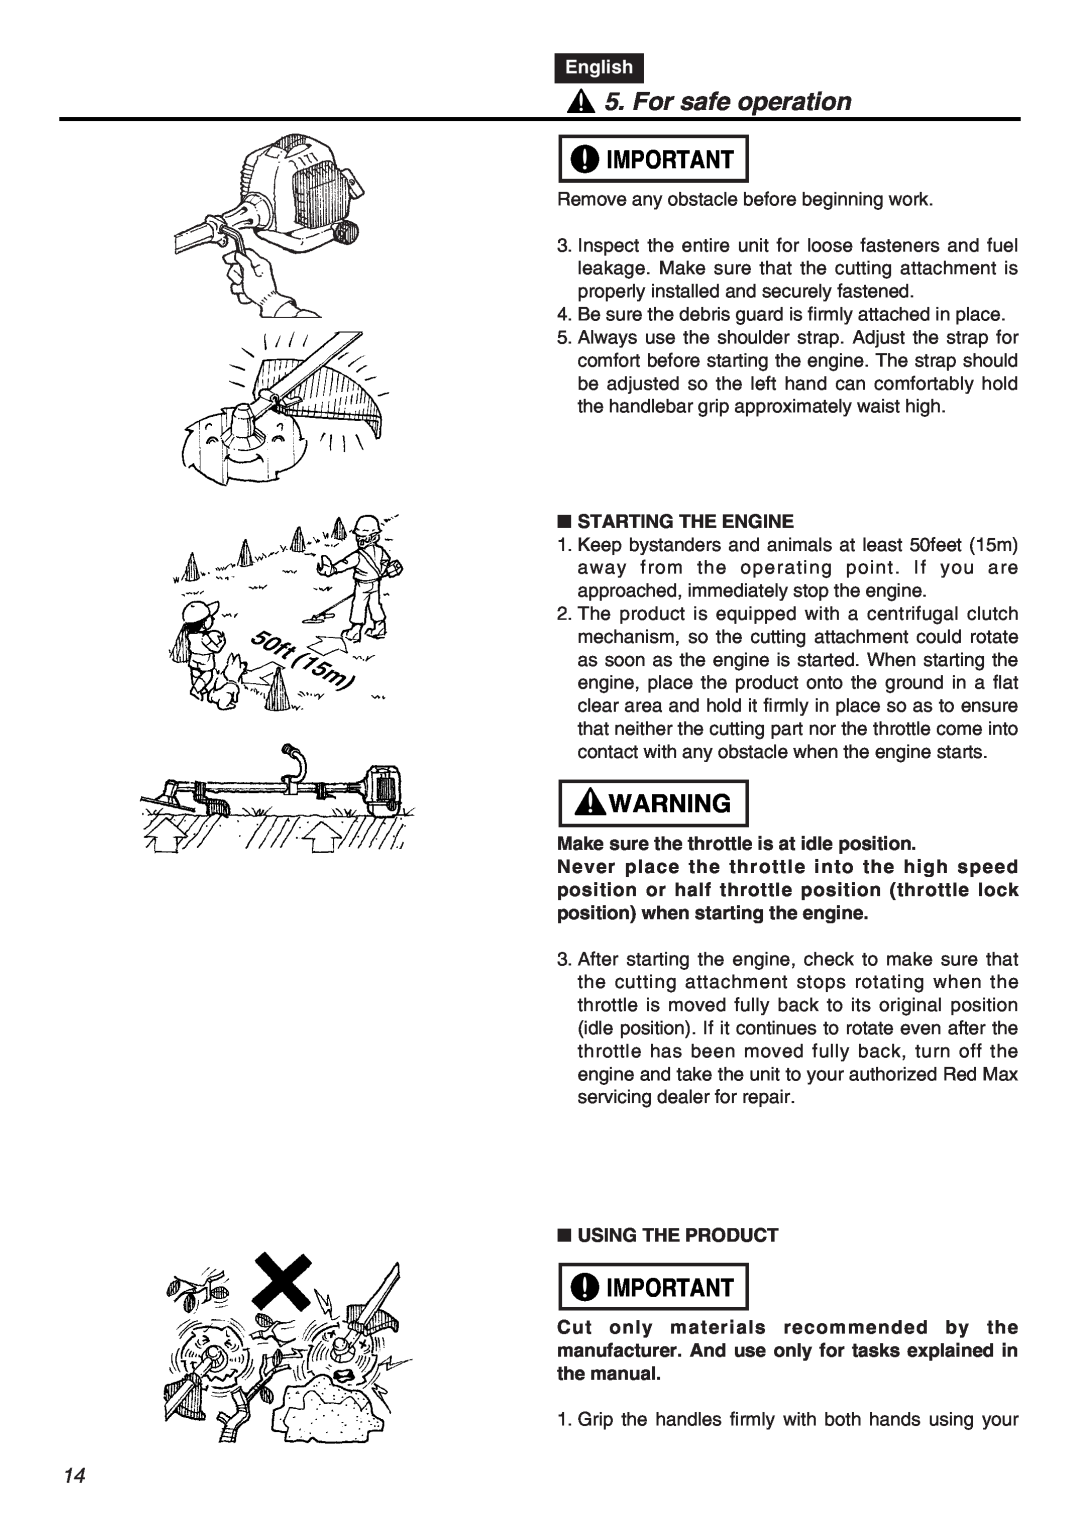 RedMax EXZ2401S-PH-CA manual For safe operation, English, Starting The Engine, Make sure the throttle is at idle position 